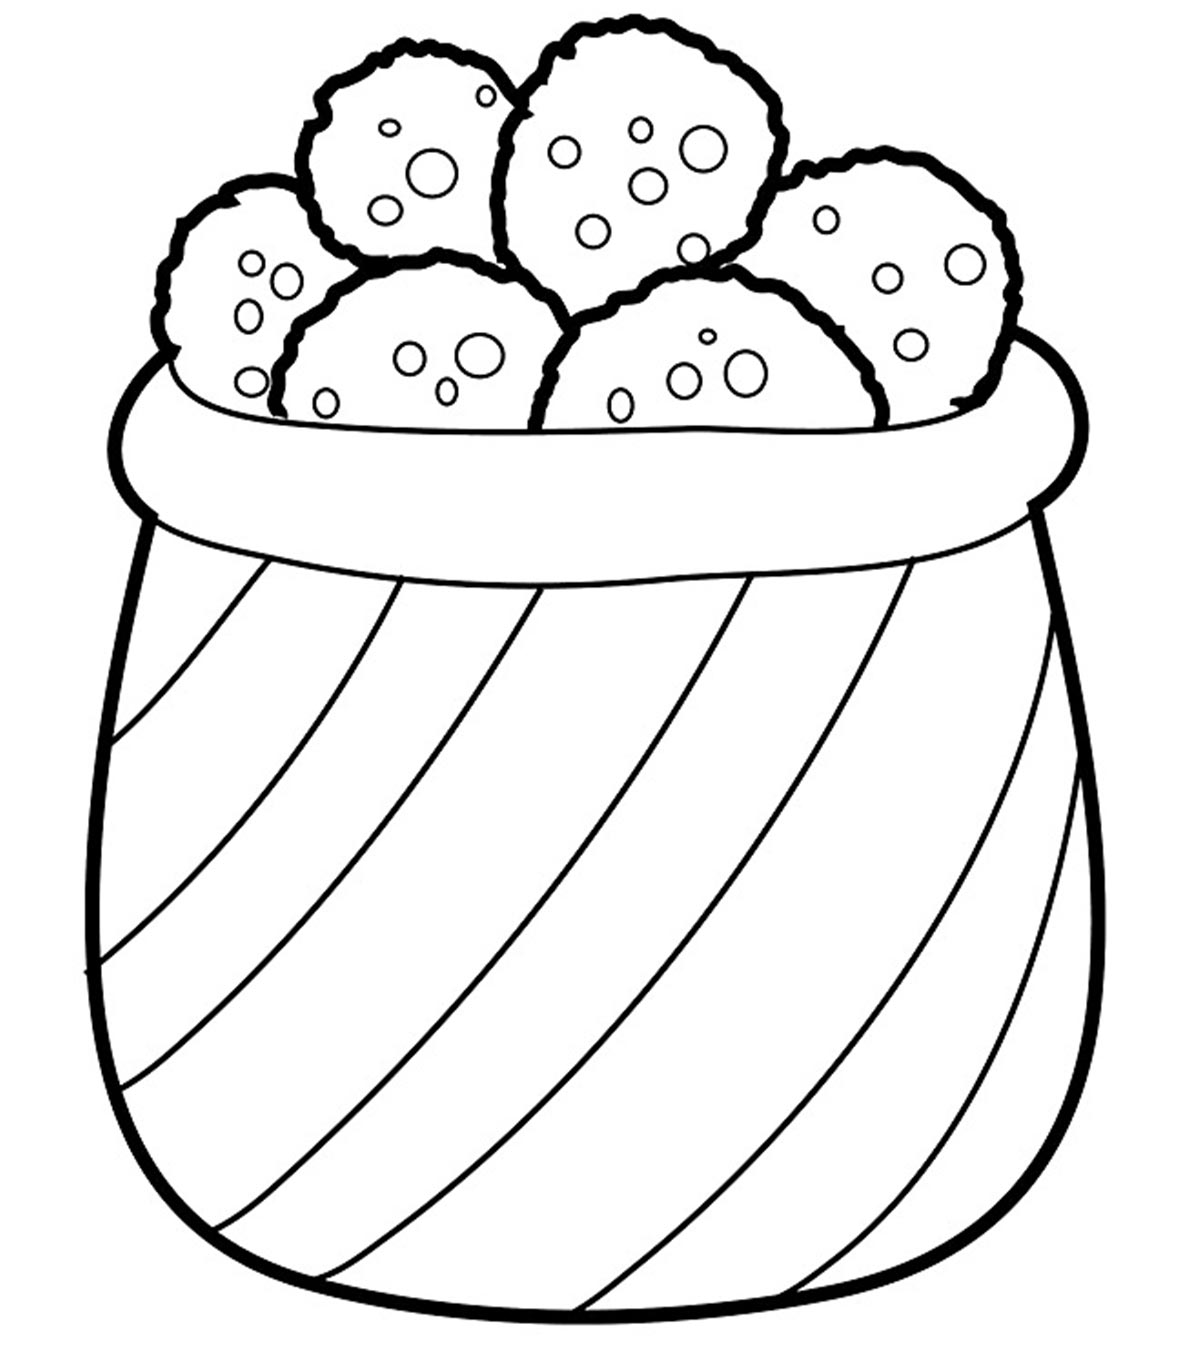 coloring-pages-yummy-cookies-coloring-pages-for-your-little-ones